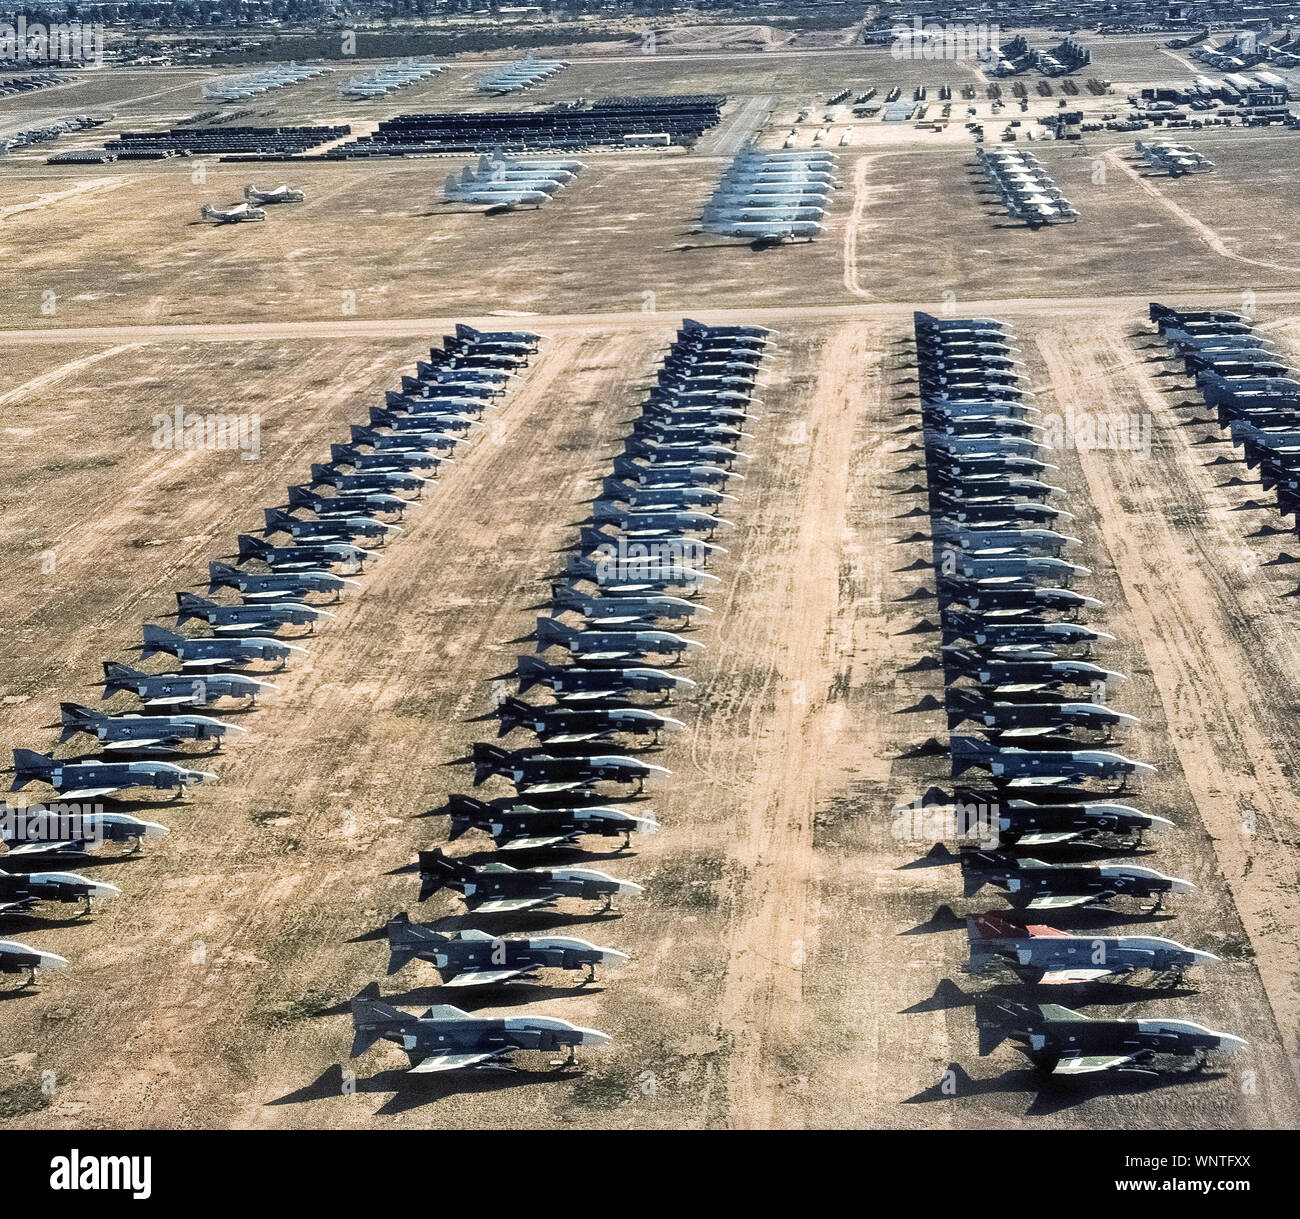 This aerial photograph shows some of the more than 4,400 U.S. military planes mothballed in Tucson, Arizona, at the Davis-Monthan Air Force Base, home to the largest aircraft storage and preservation facility in the world. The boneyard was established after World War II and holds generations of aircraft once used by the U.S. Air Force, Navy, Marine Corps, Coast Guard, NASA and other government agencies. The desert site was chosen because of the area's low humidity, meager rainfall, and high altitude that allows the aircraft to be naturally preserved for cannibalization or possible reuse later. Stock Photo